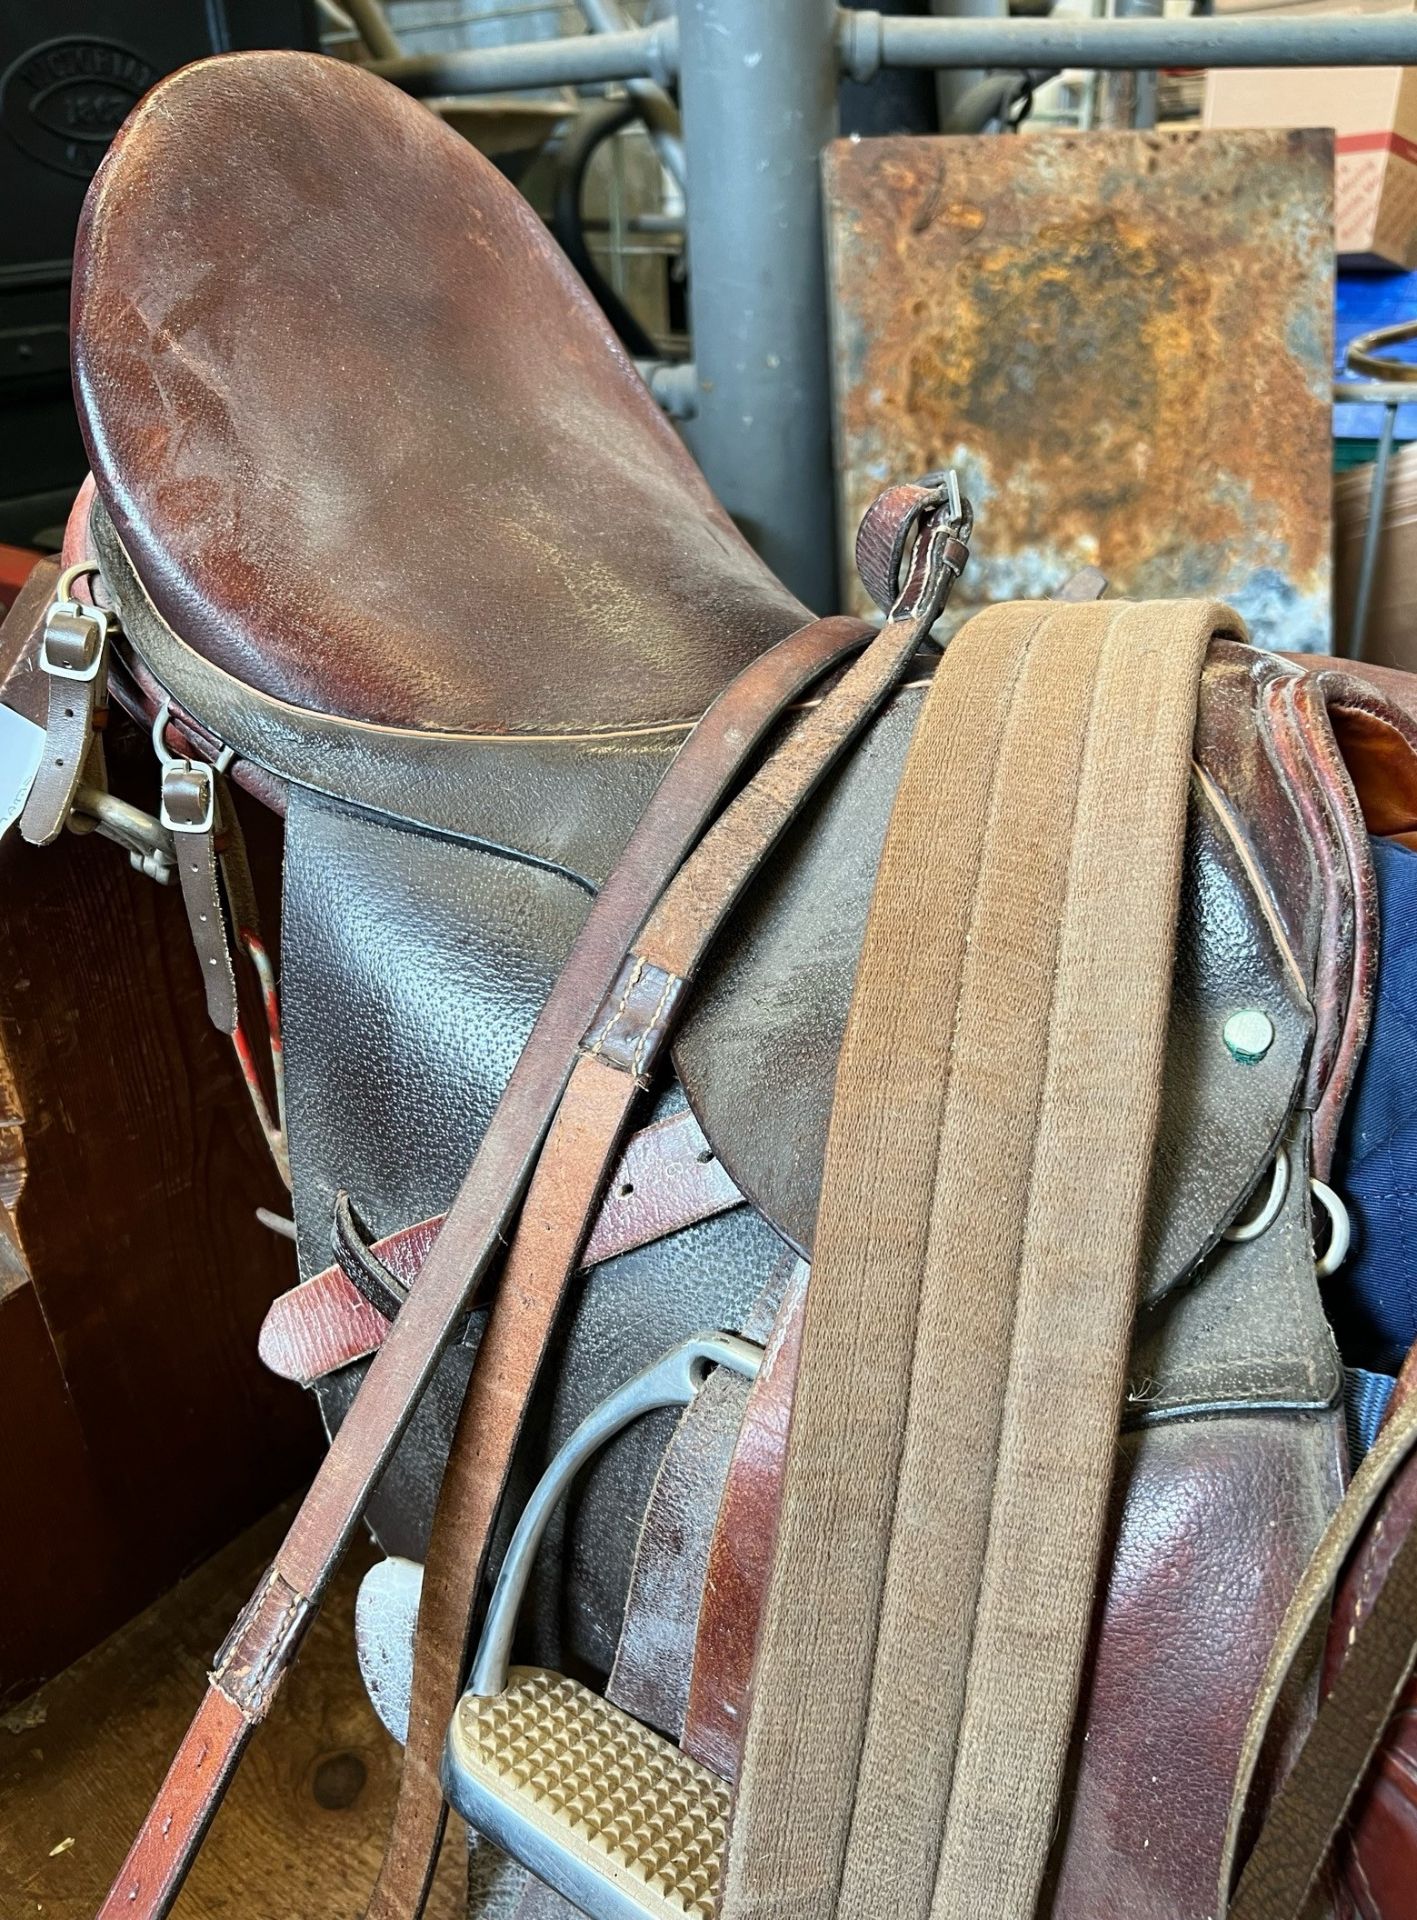 18" brown leather saddle, maker "Ideal Saddle Company, Walsall"